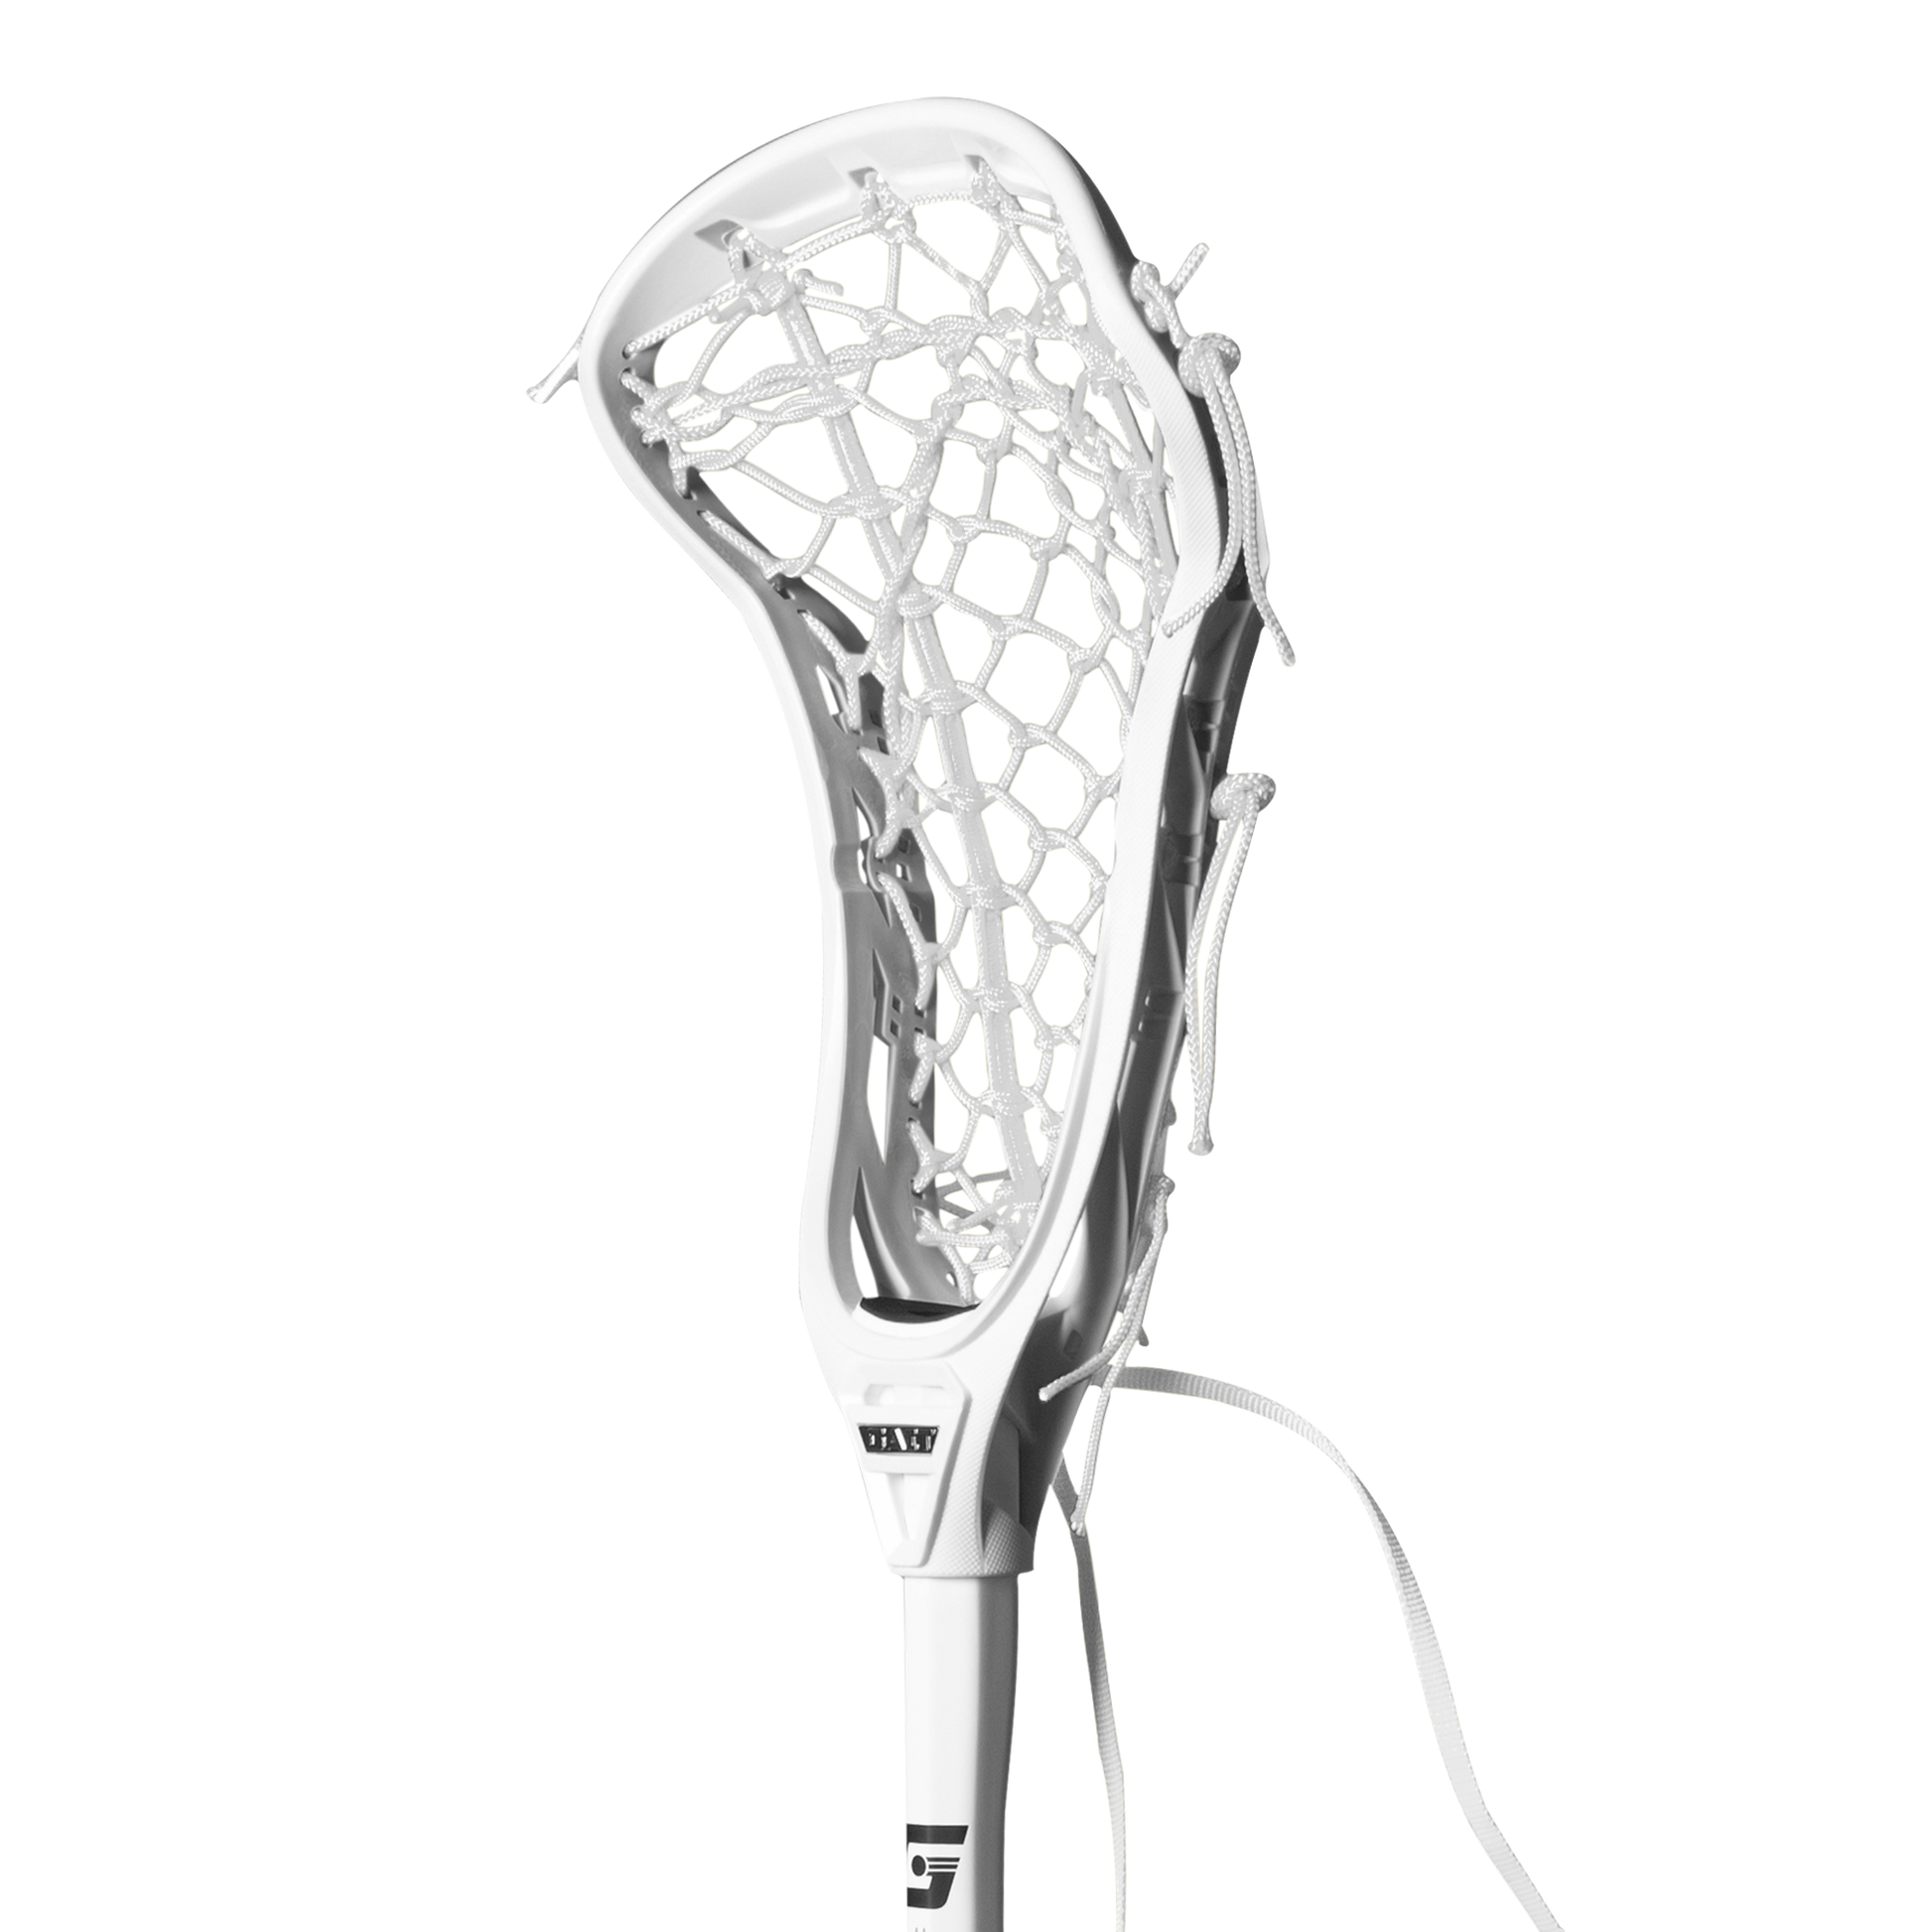 Gait Air 2 Women's Lacrosse Head with Flex Mesh White/White angled view